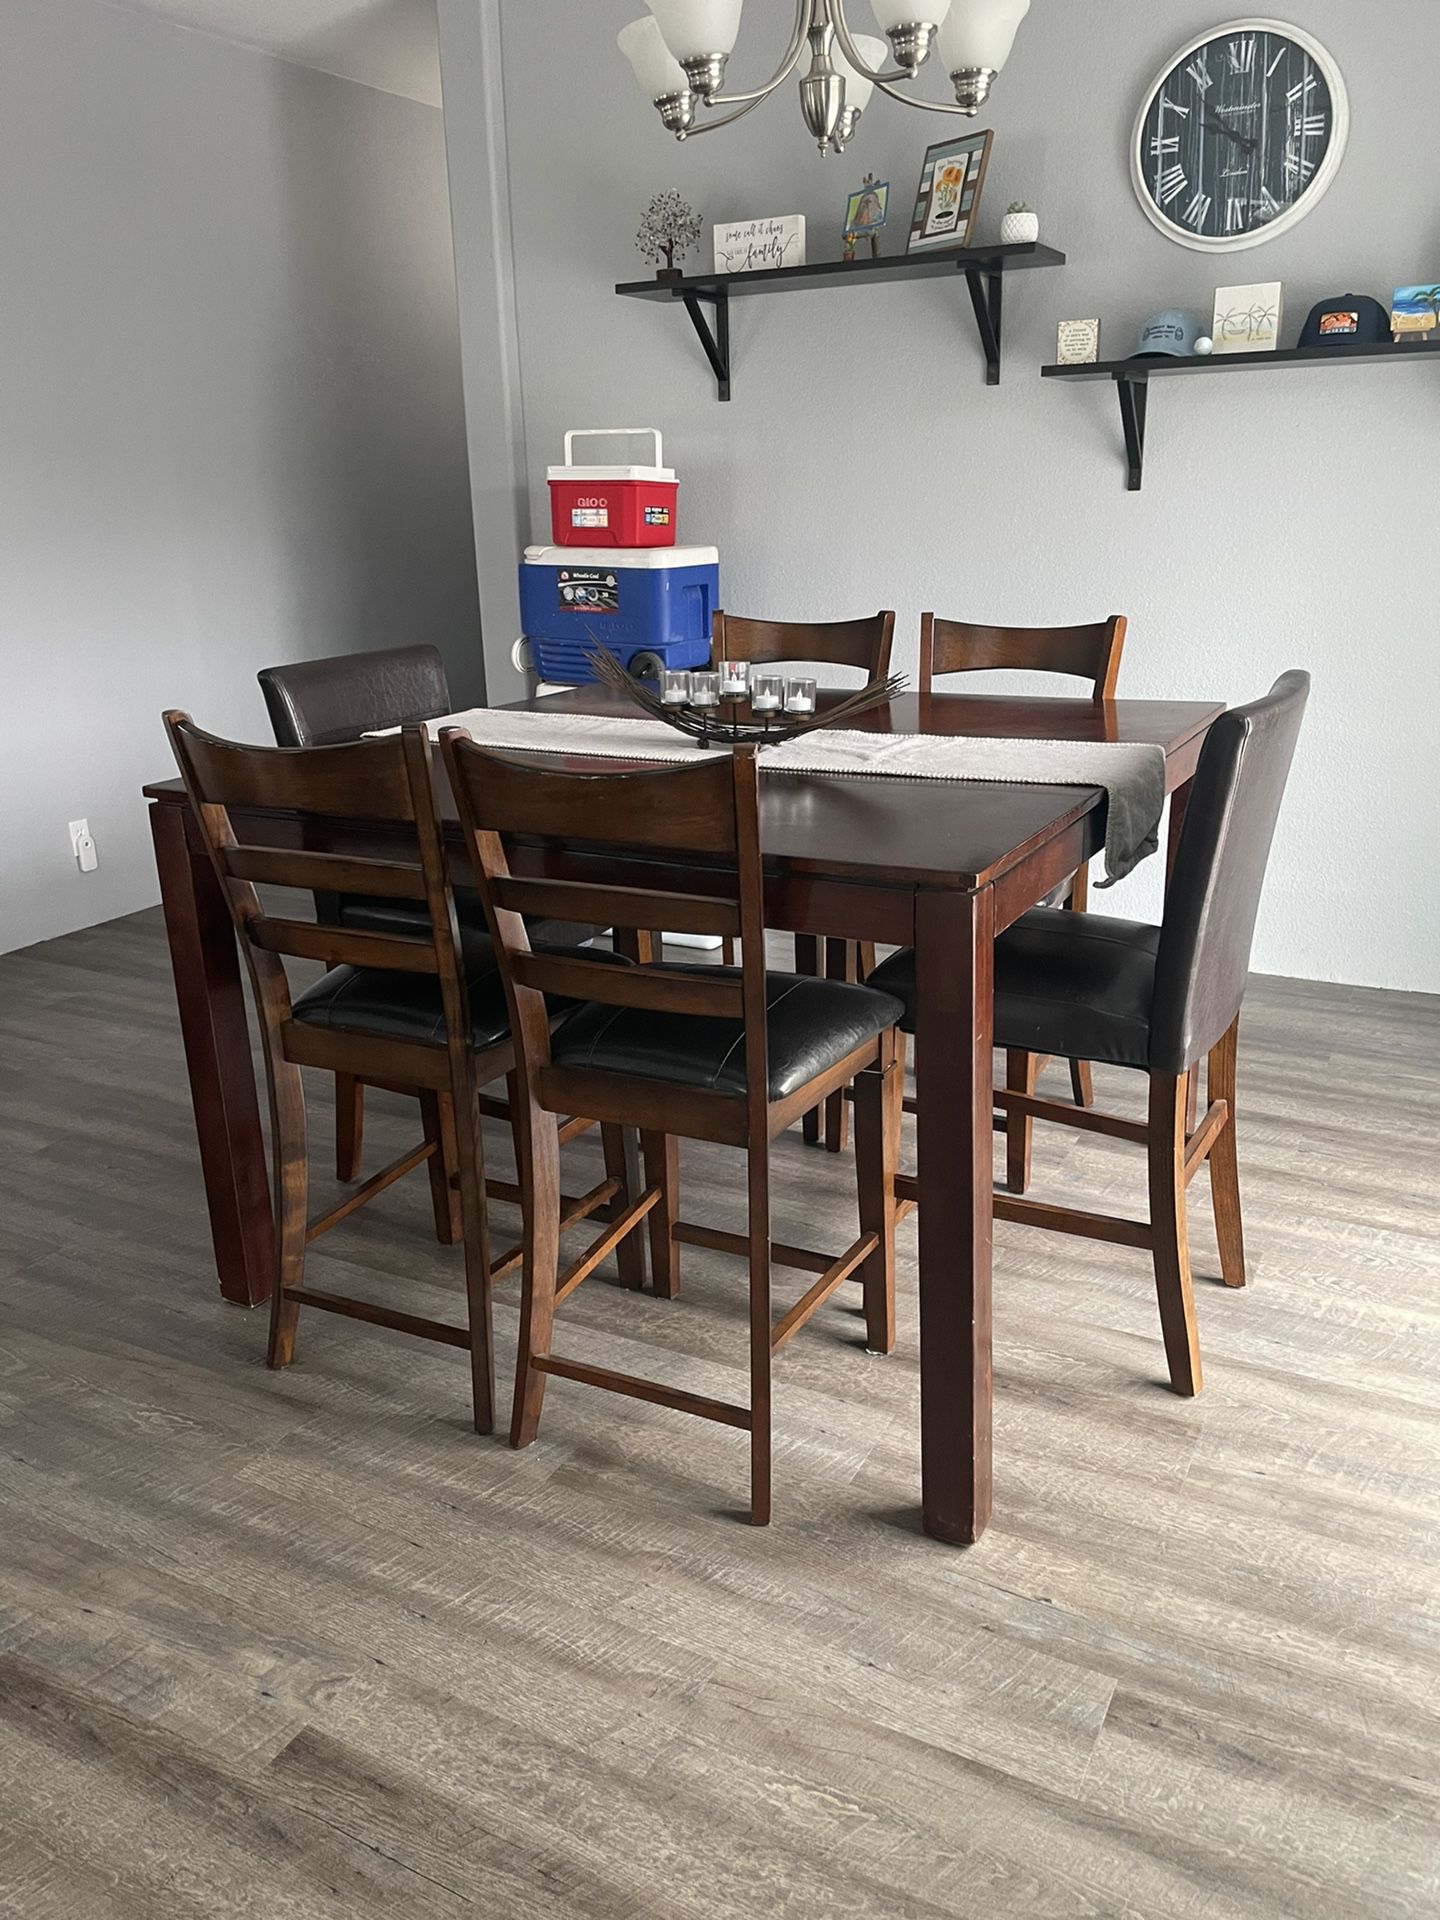 Hi-top Kitchen Table & Chairs